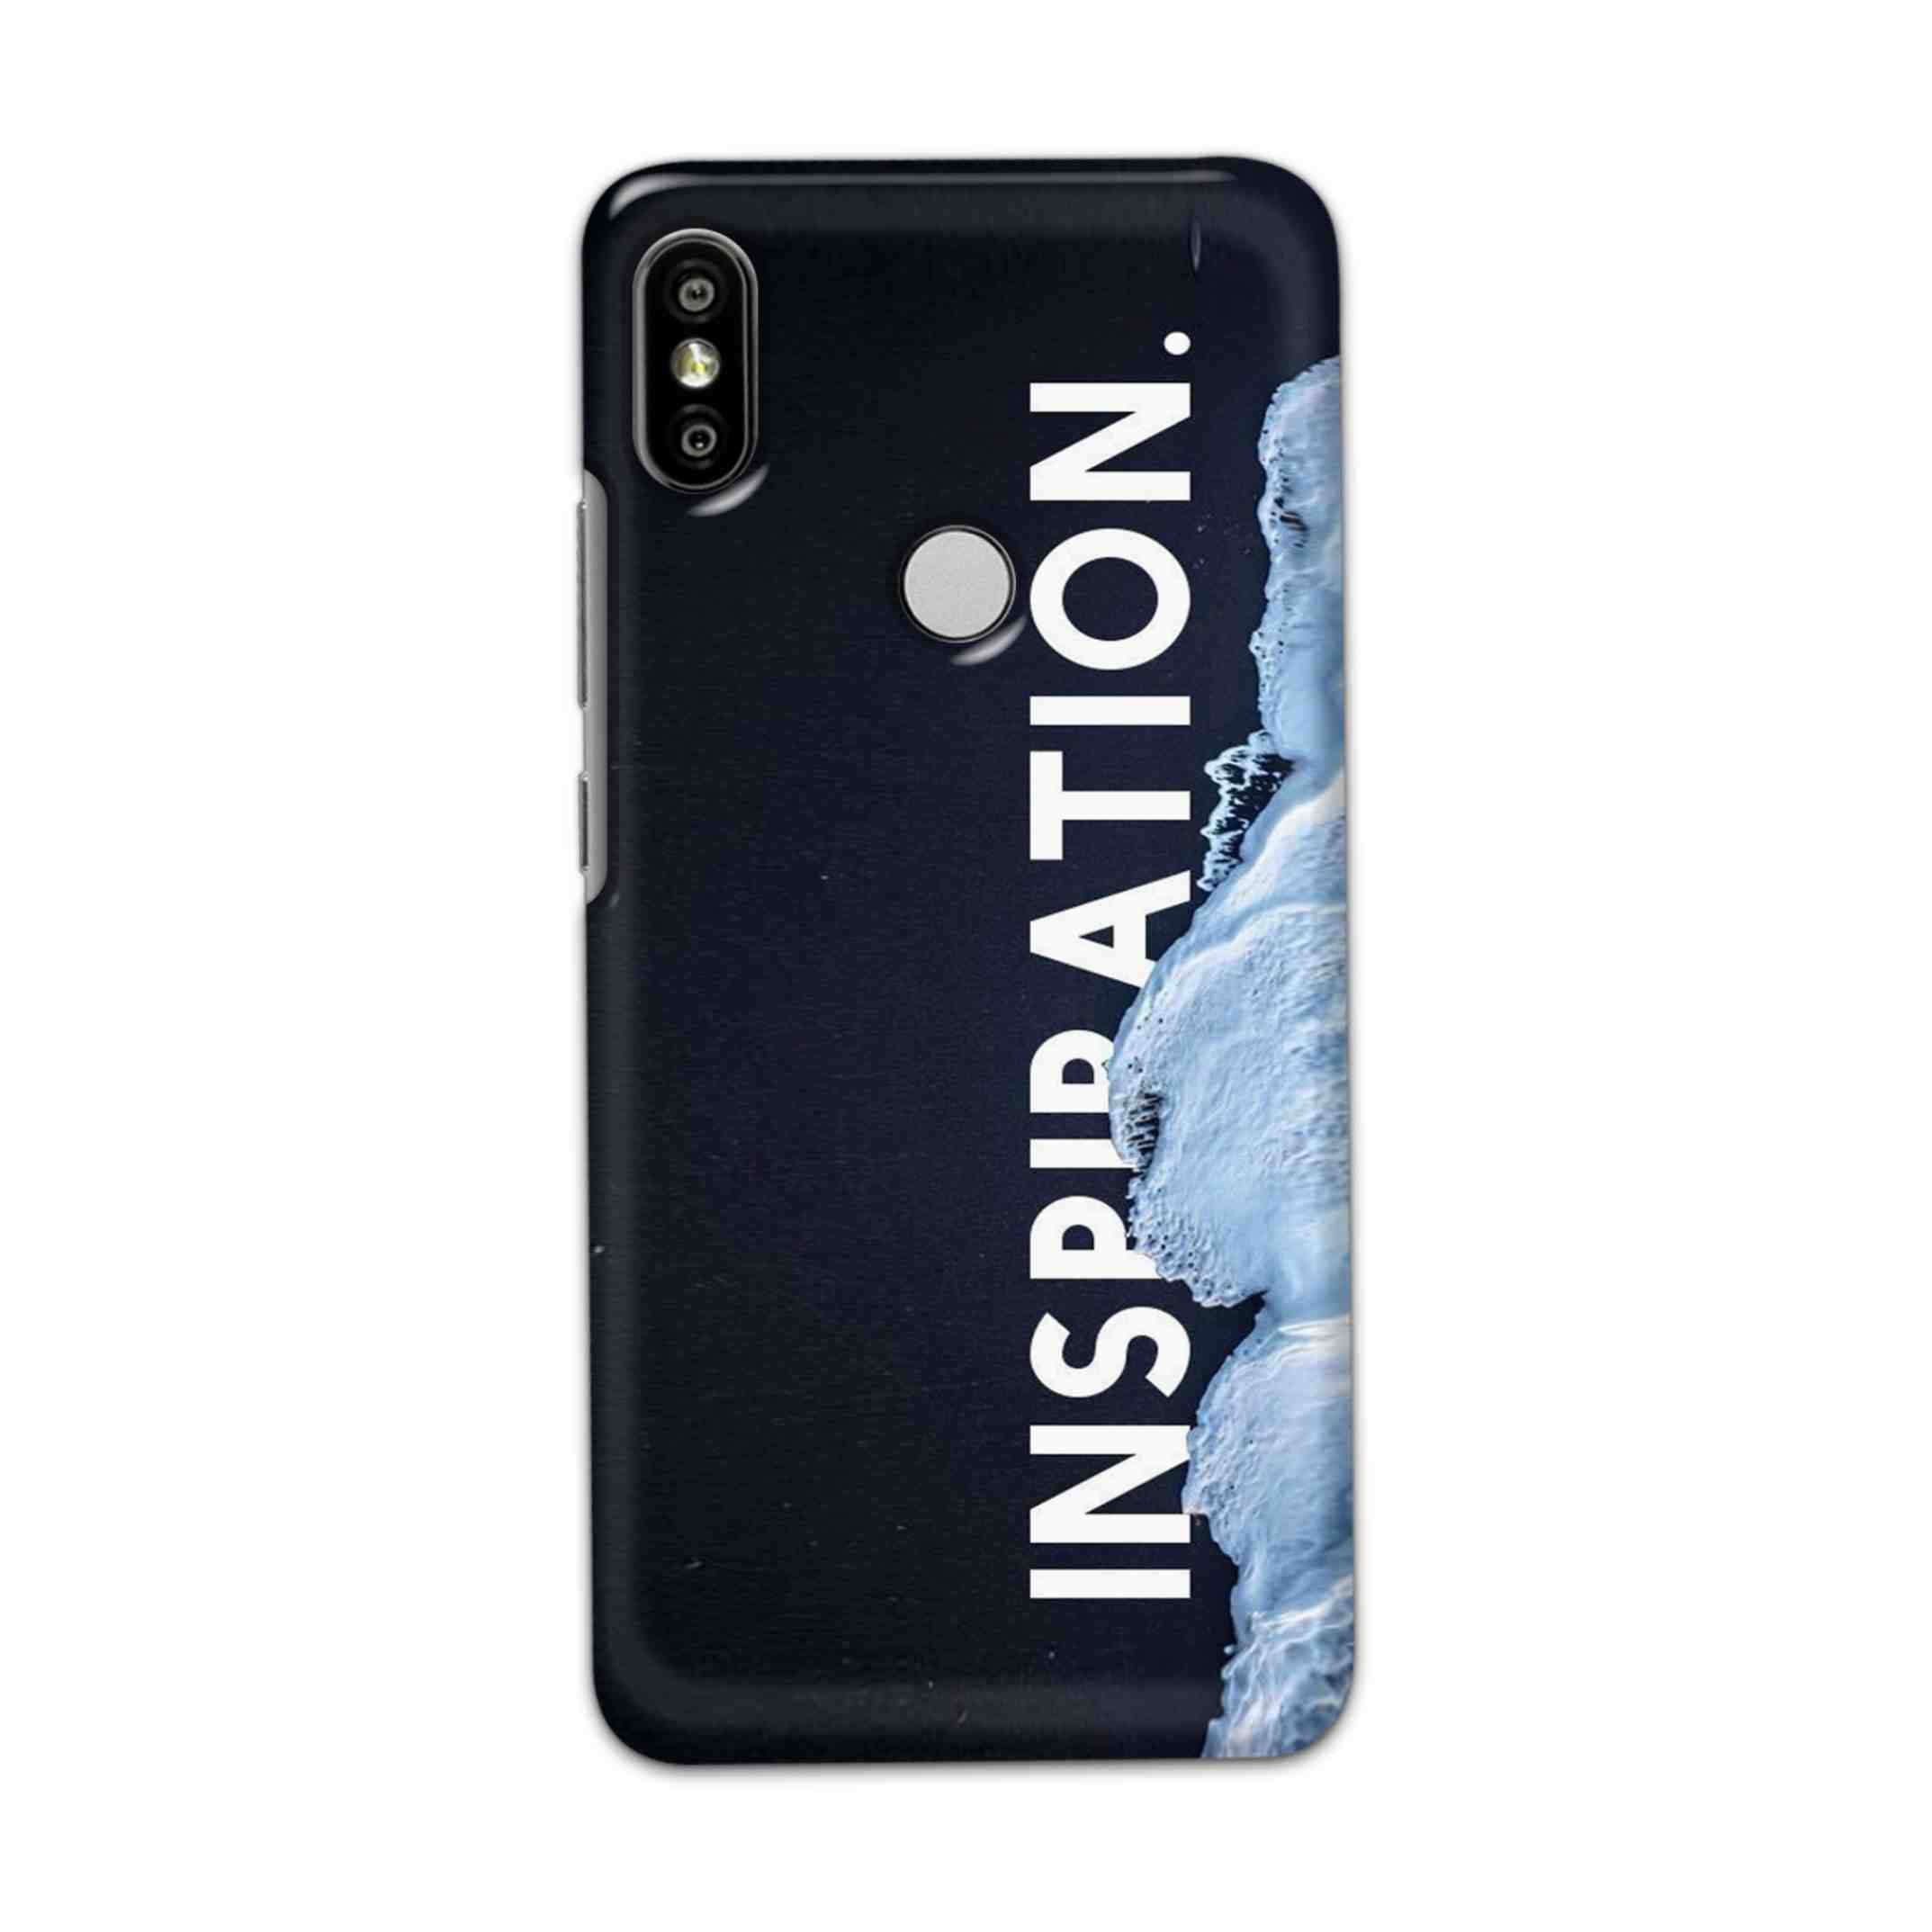 Buy Inspiration Hard Back Mobile Phone Case Cover For Redmi S2 / Y2 Online